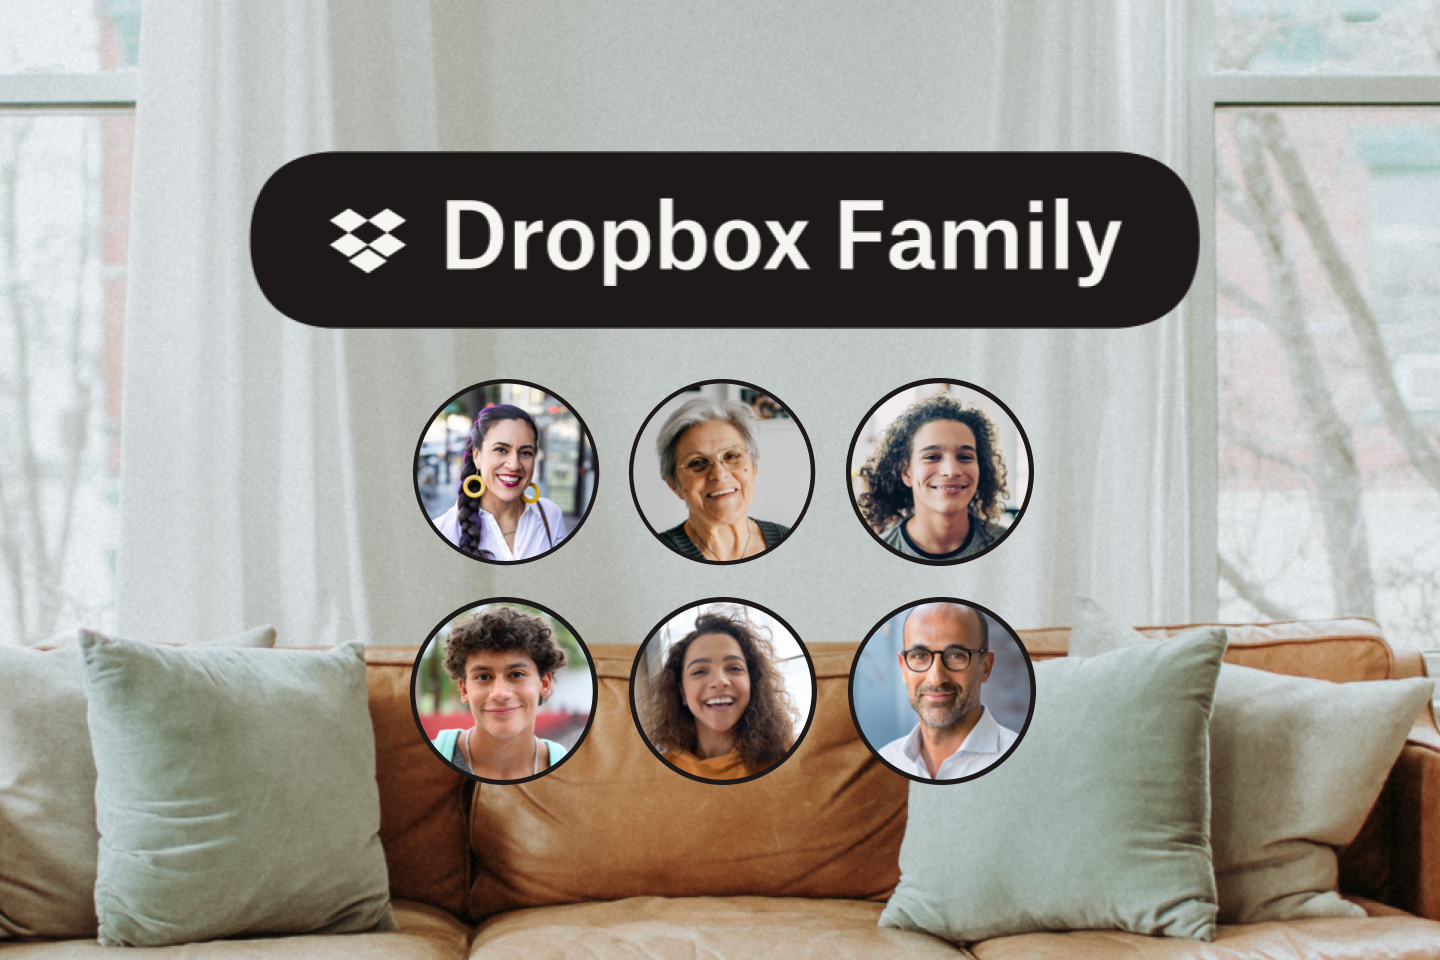 Leather sofa and 6 icon pictures of a family with a Dropbox Family logo